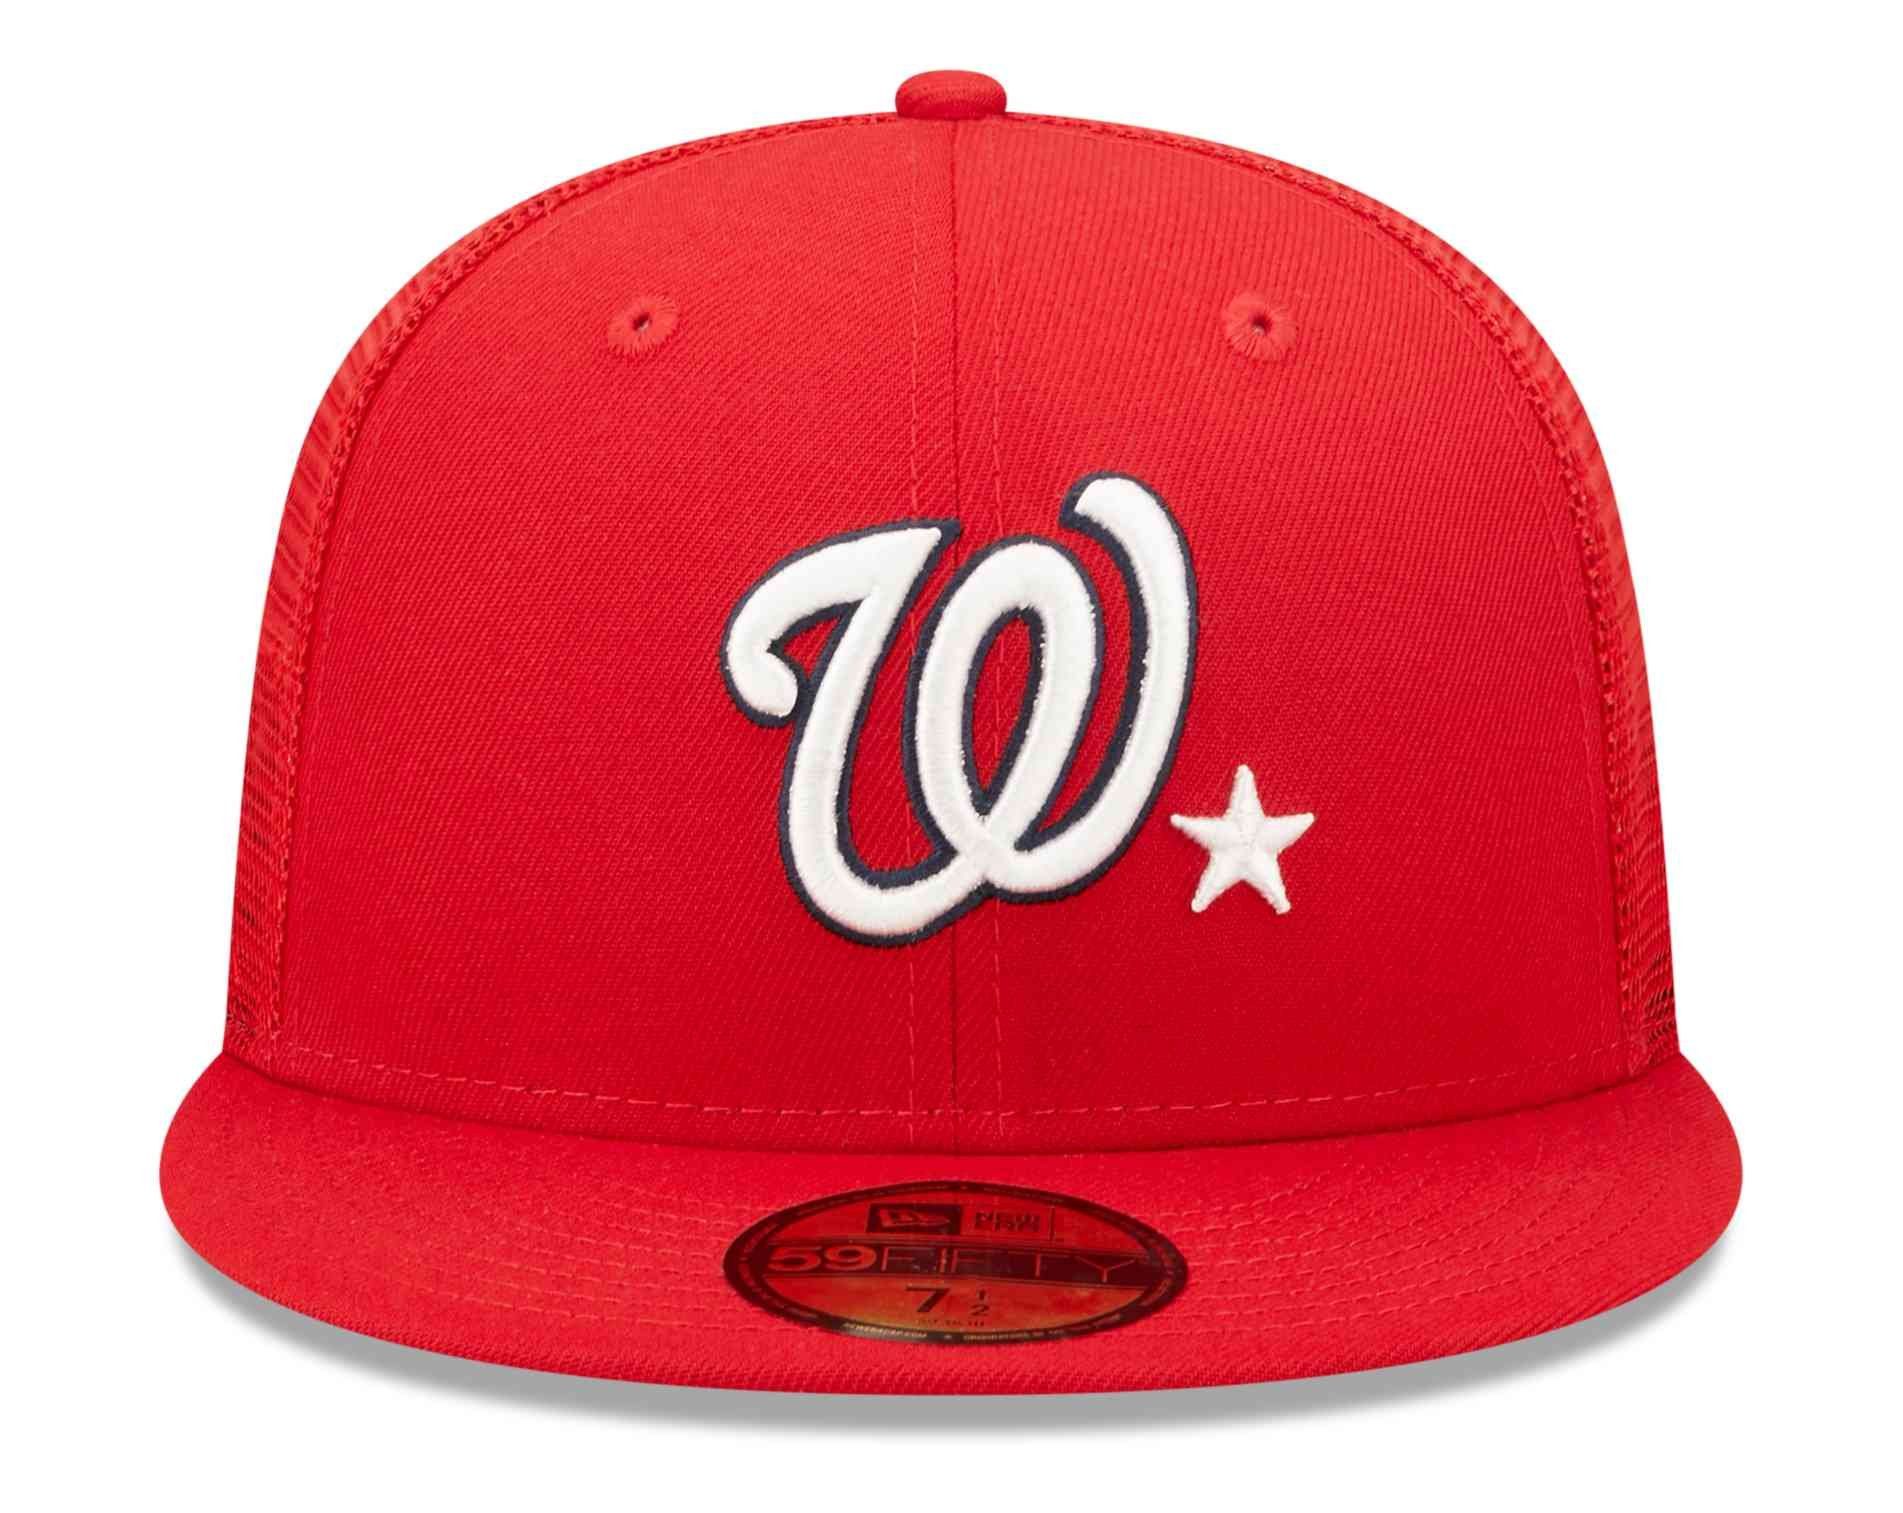 Nationals Star 22 New Game Washington Cap All MLB Fitted 59Fifty Era